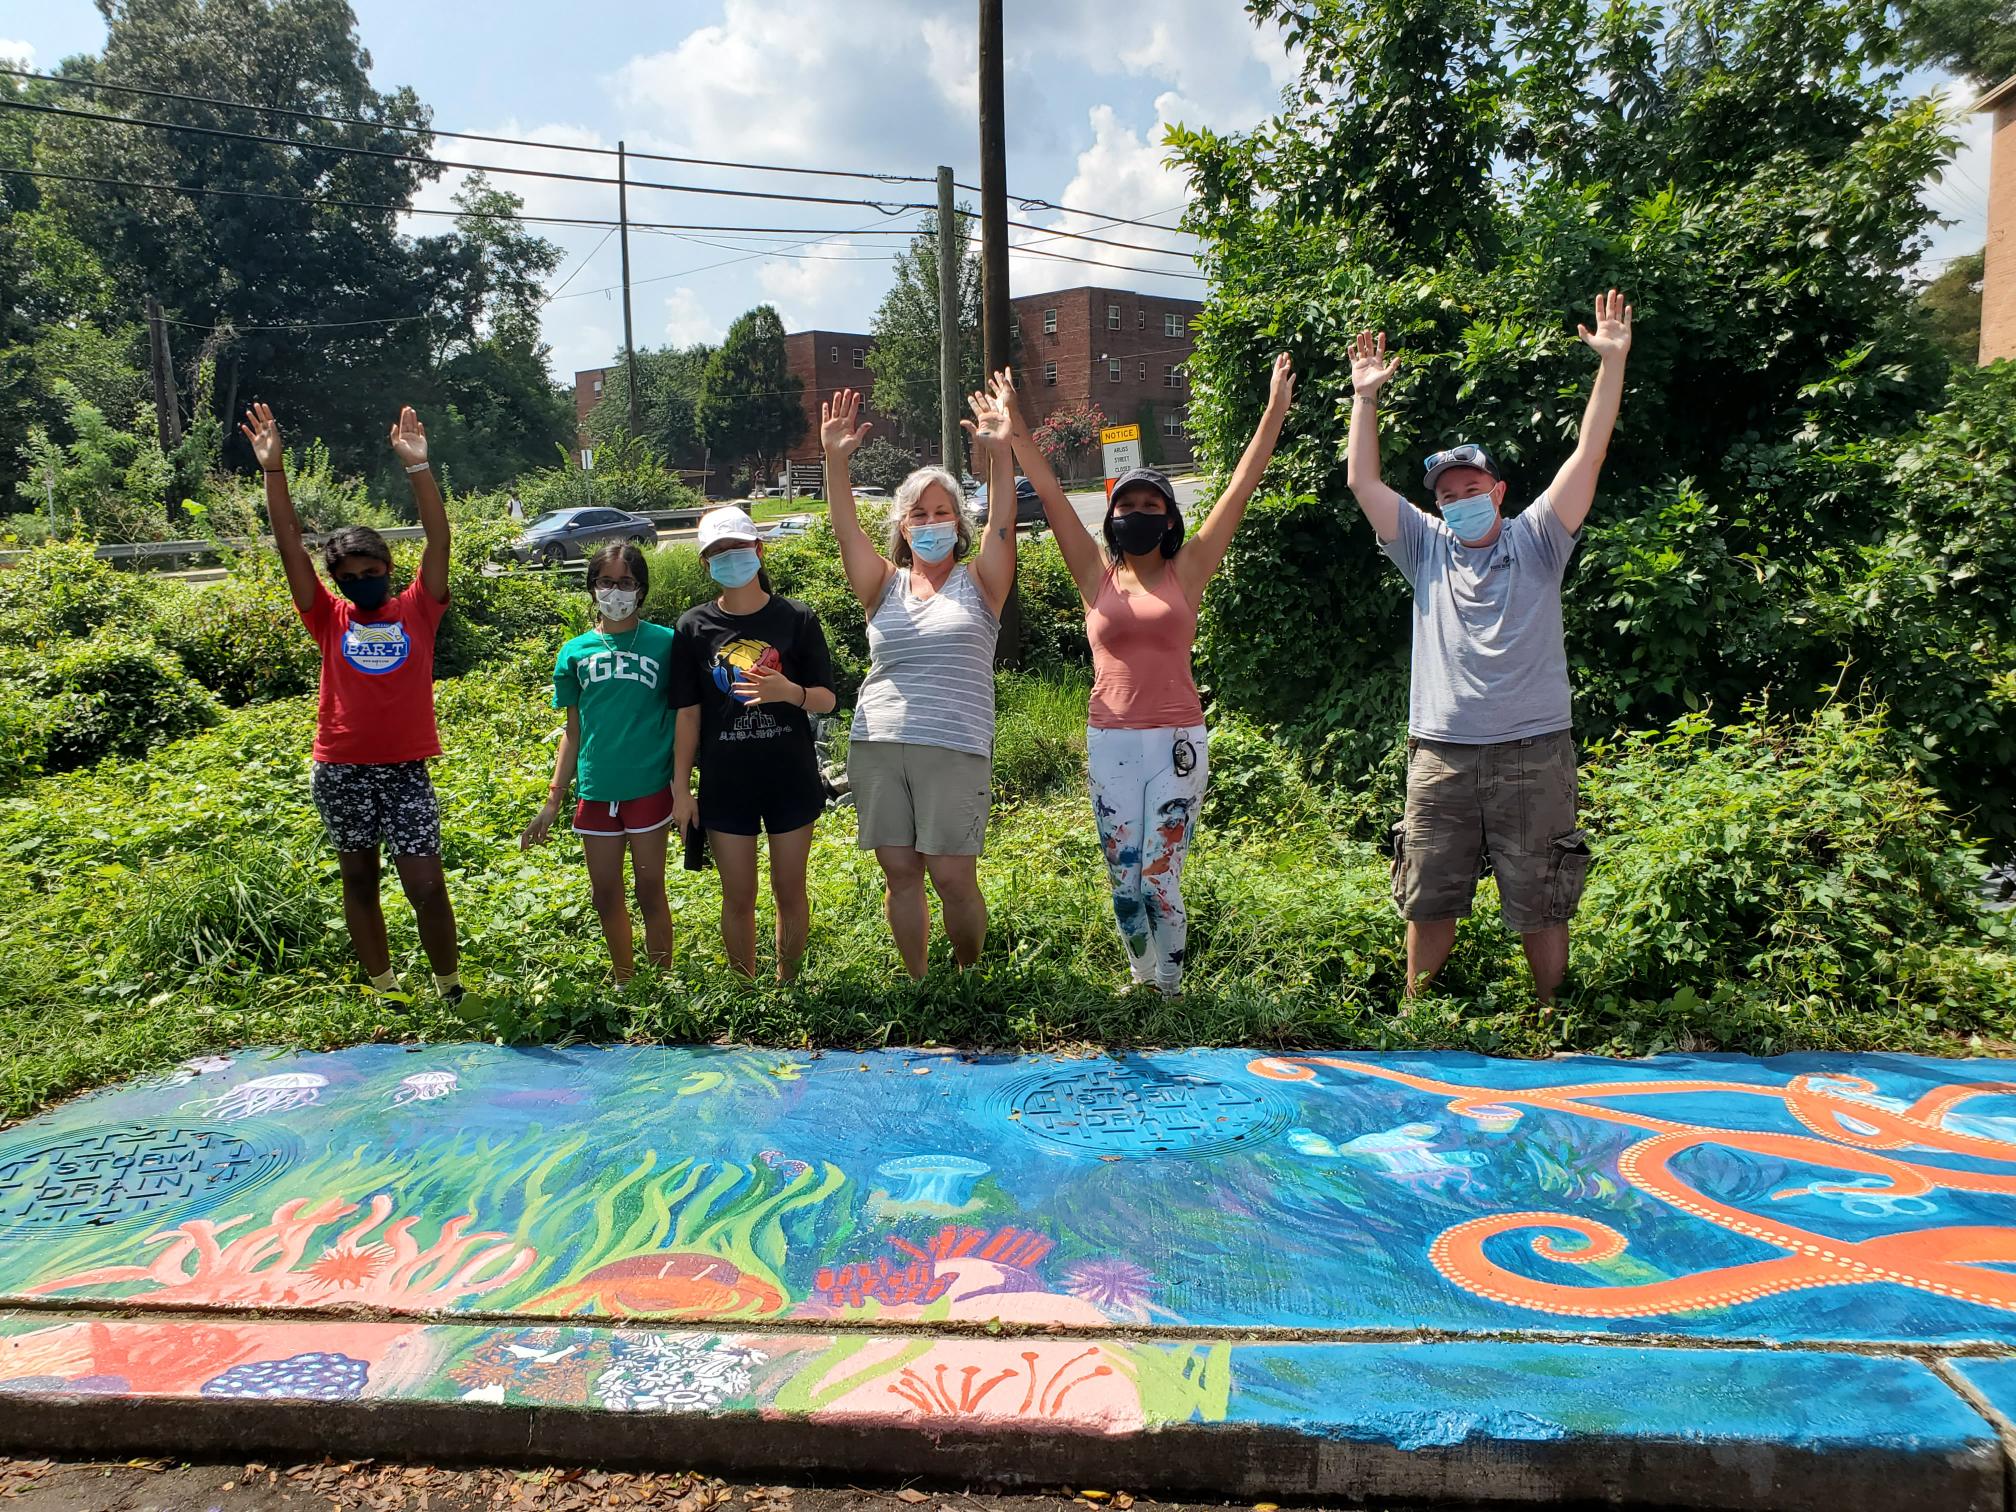 volunteers at a park raising hands and standing over a storm drain mural. the mural has images of the ocean featuring an octopus, ruby, holding litter items at each arm.